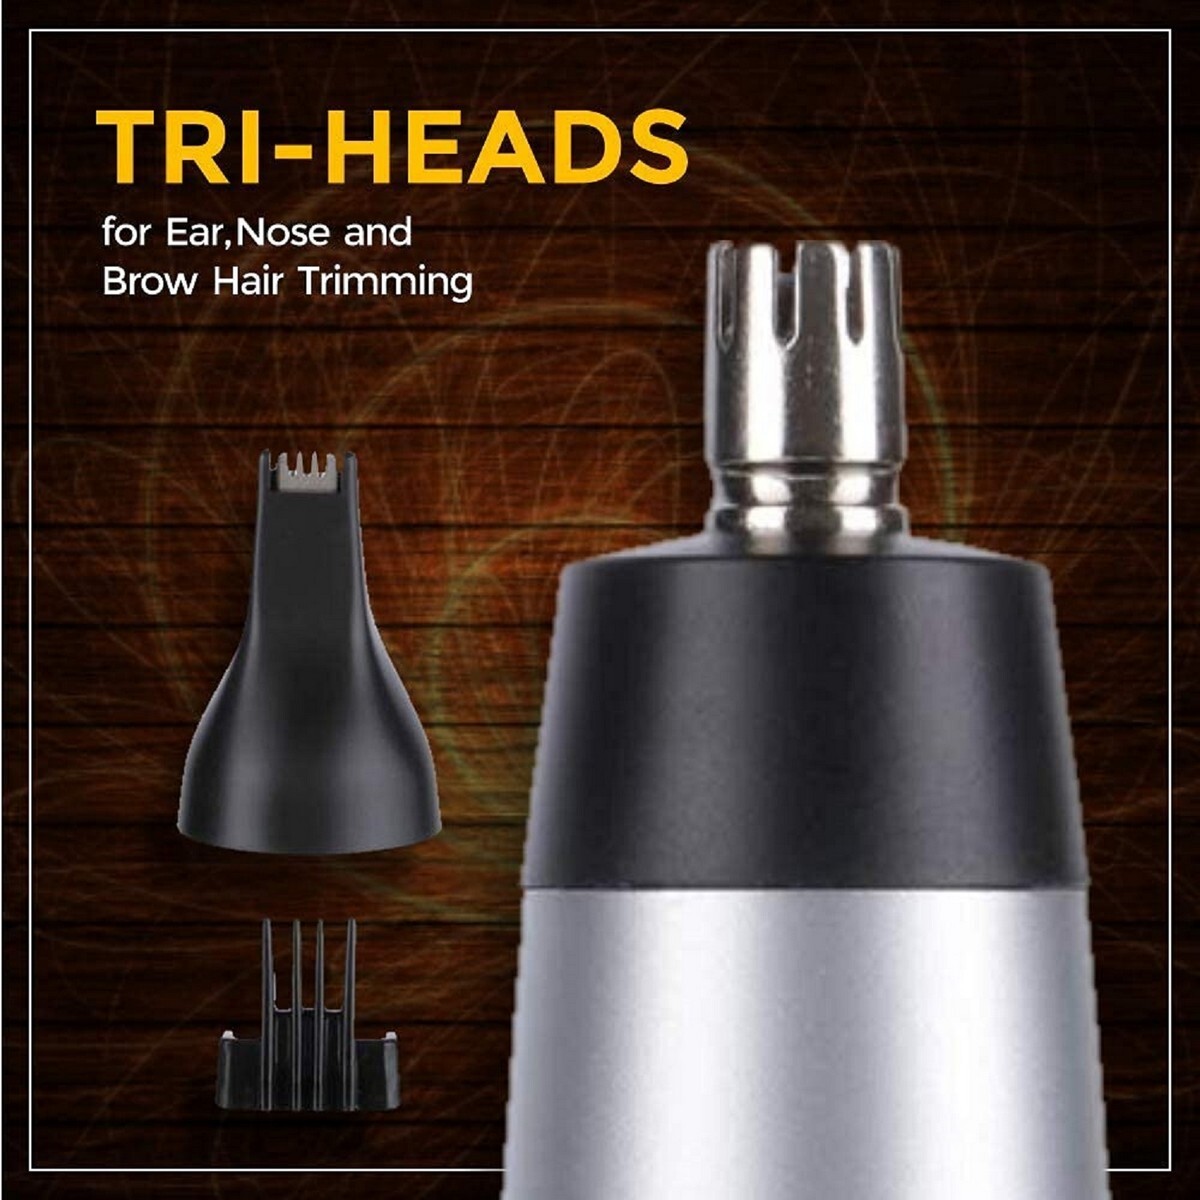 Wahl Ear Nose Brow Trimmer 05560-3824